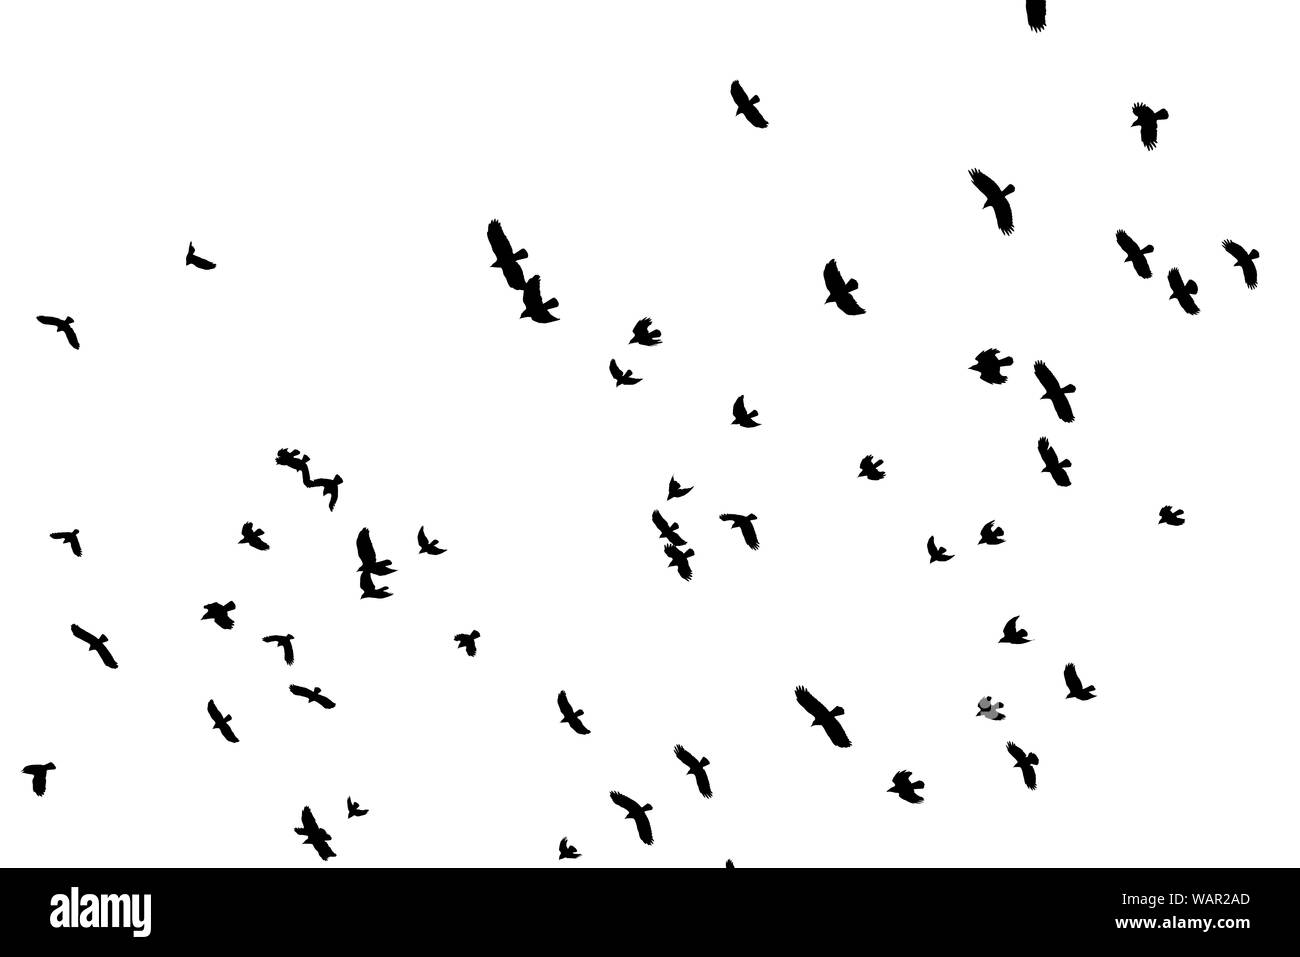 Flock of black bird shapes flying silhouetted against white background. Stock Photo